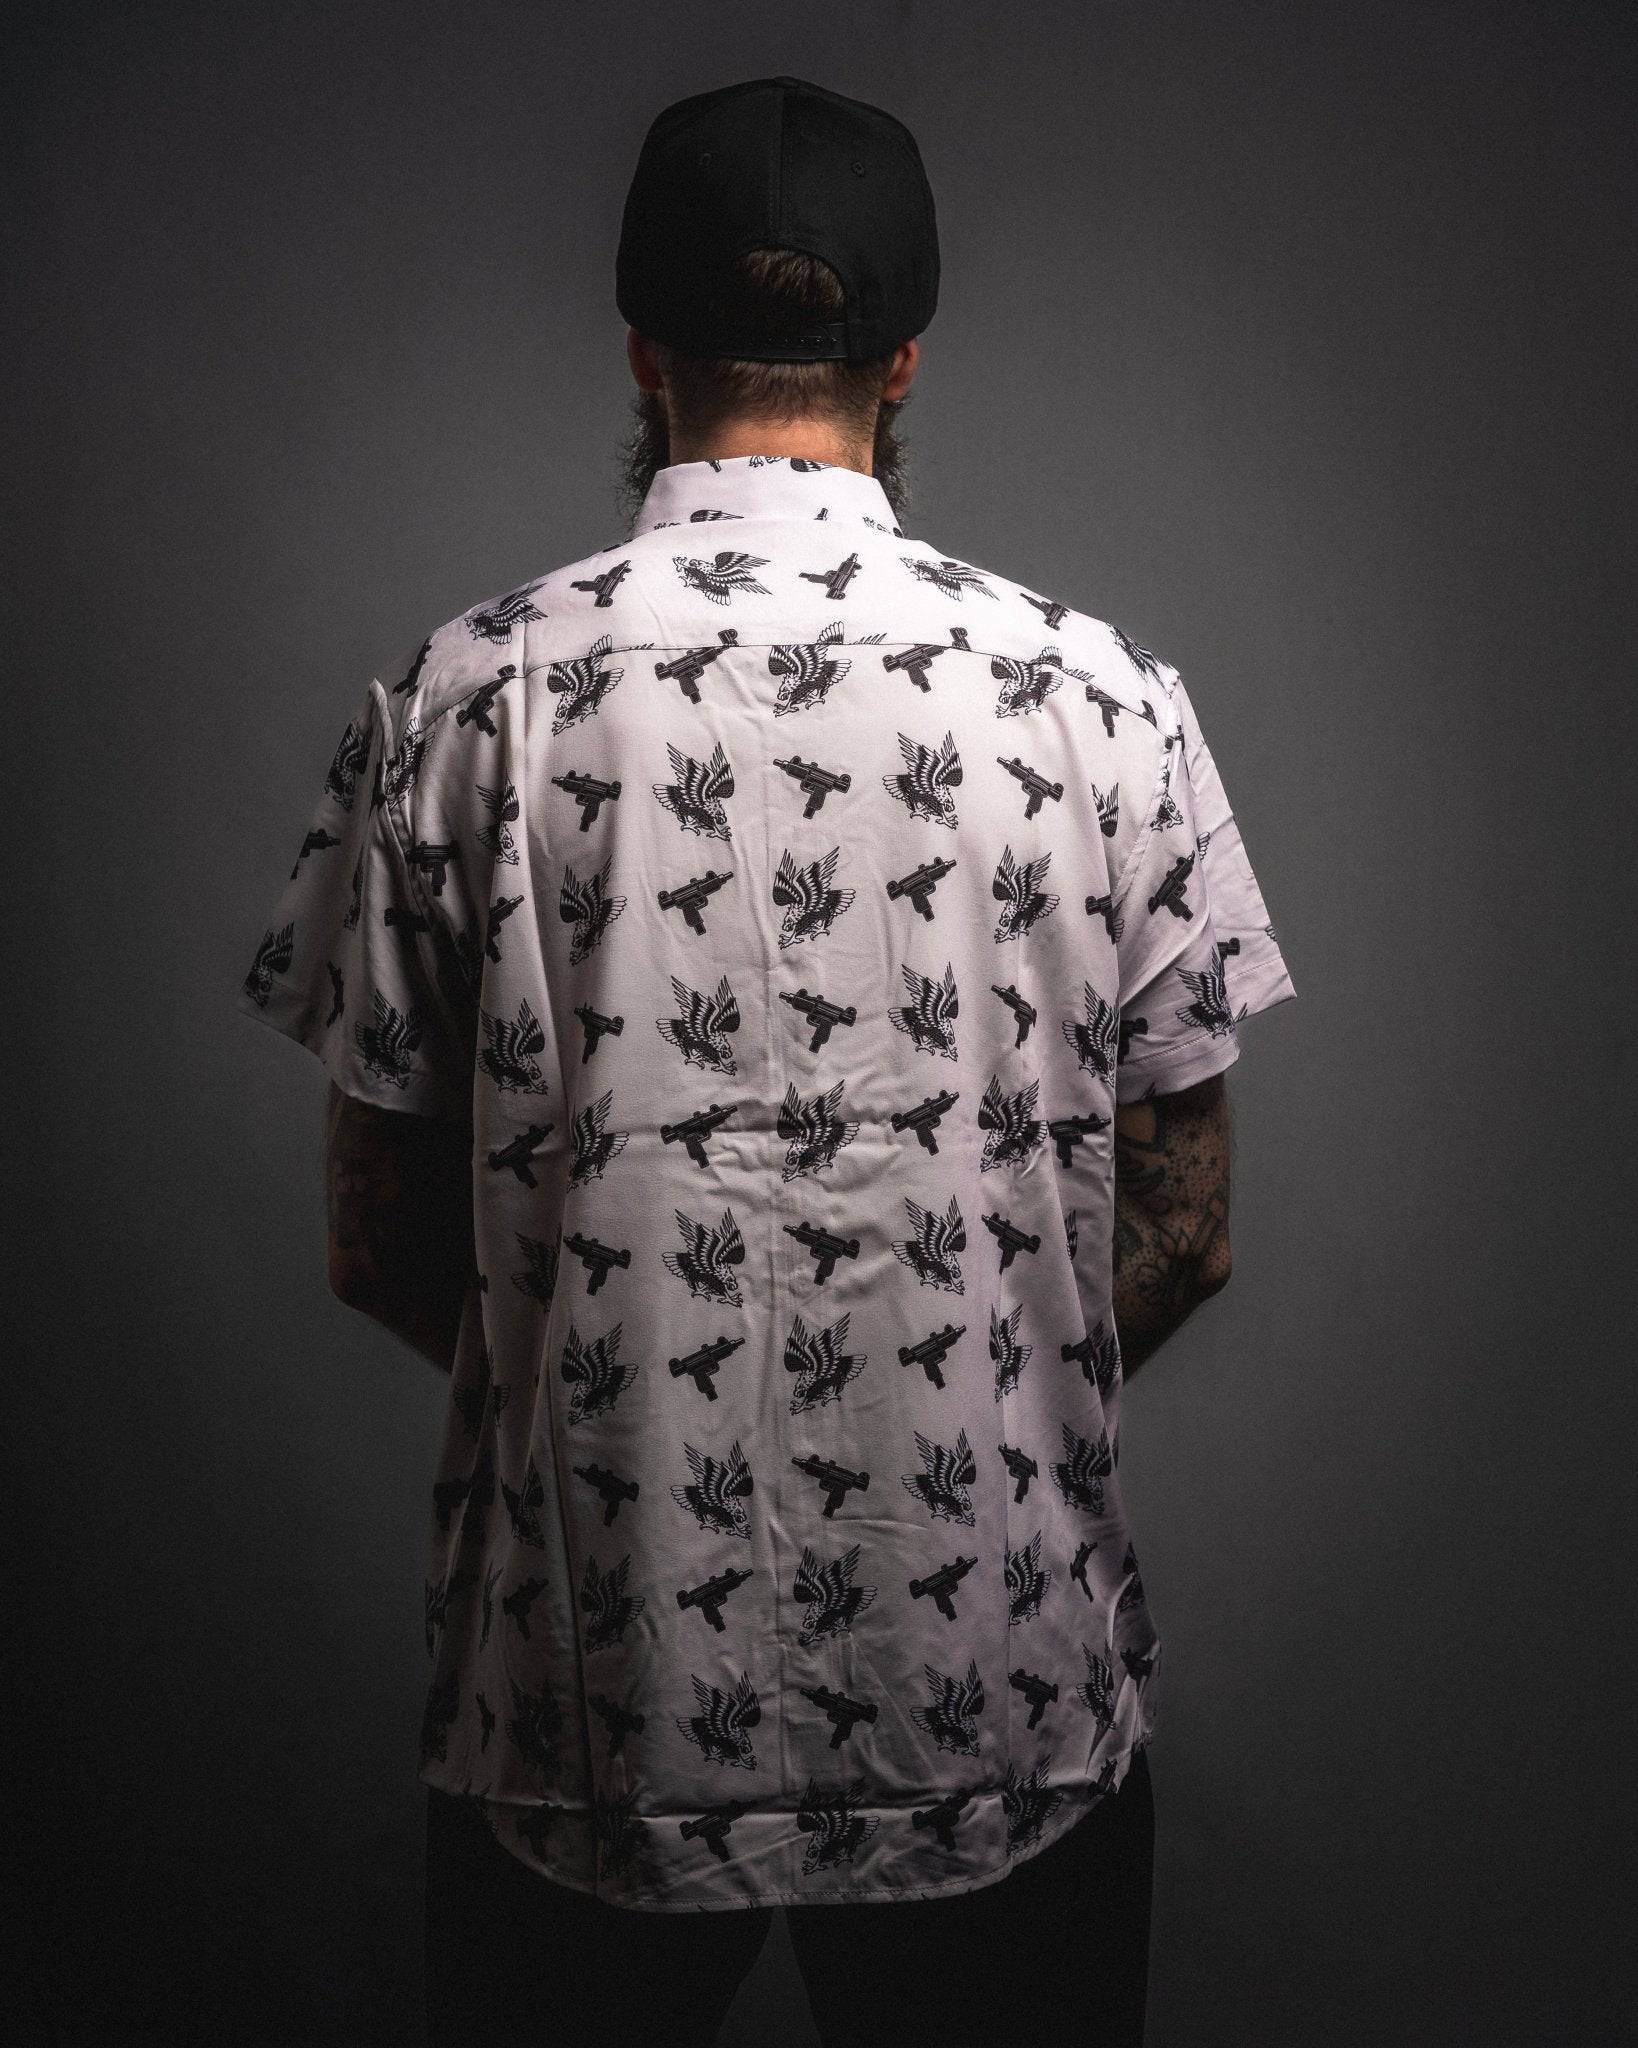 "Uzi's and Eagles" - Button Up - Rebel Reaper Clothing Company